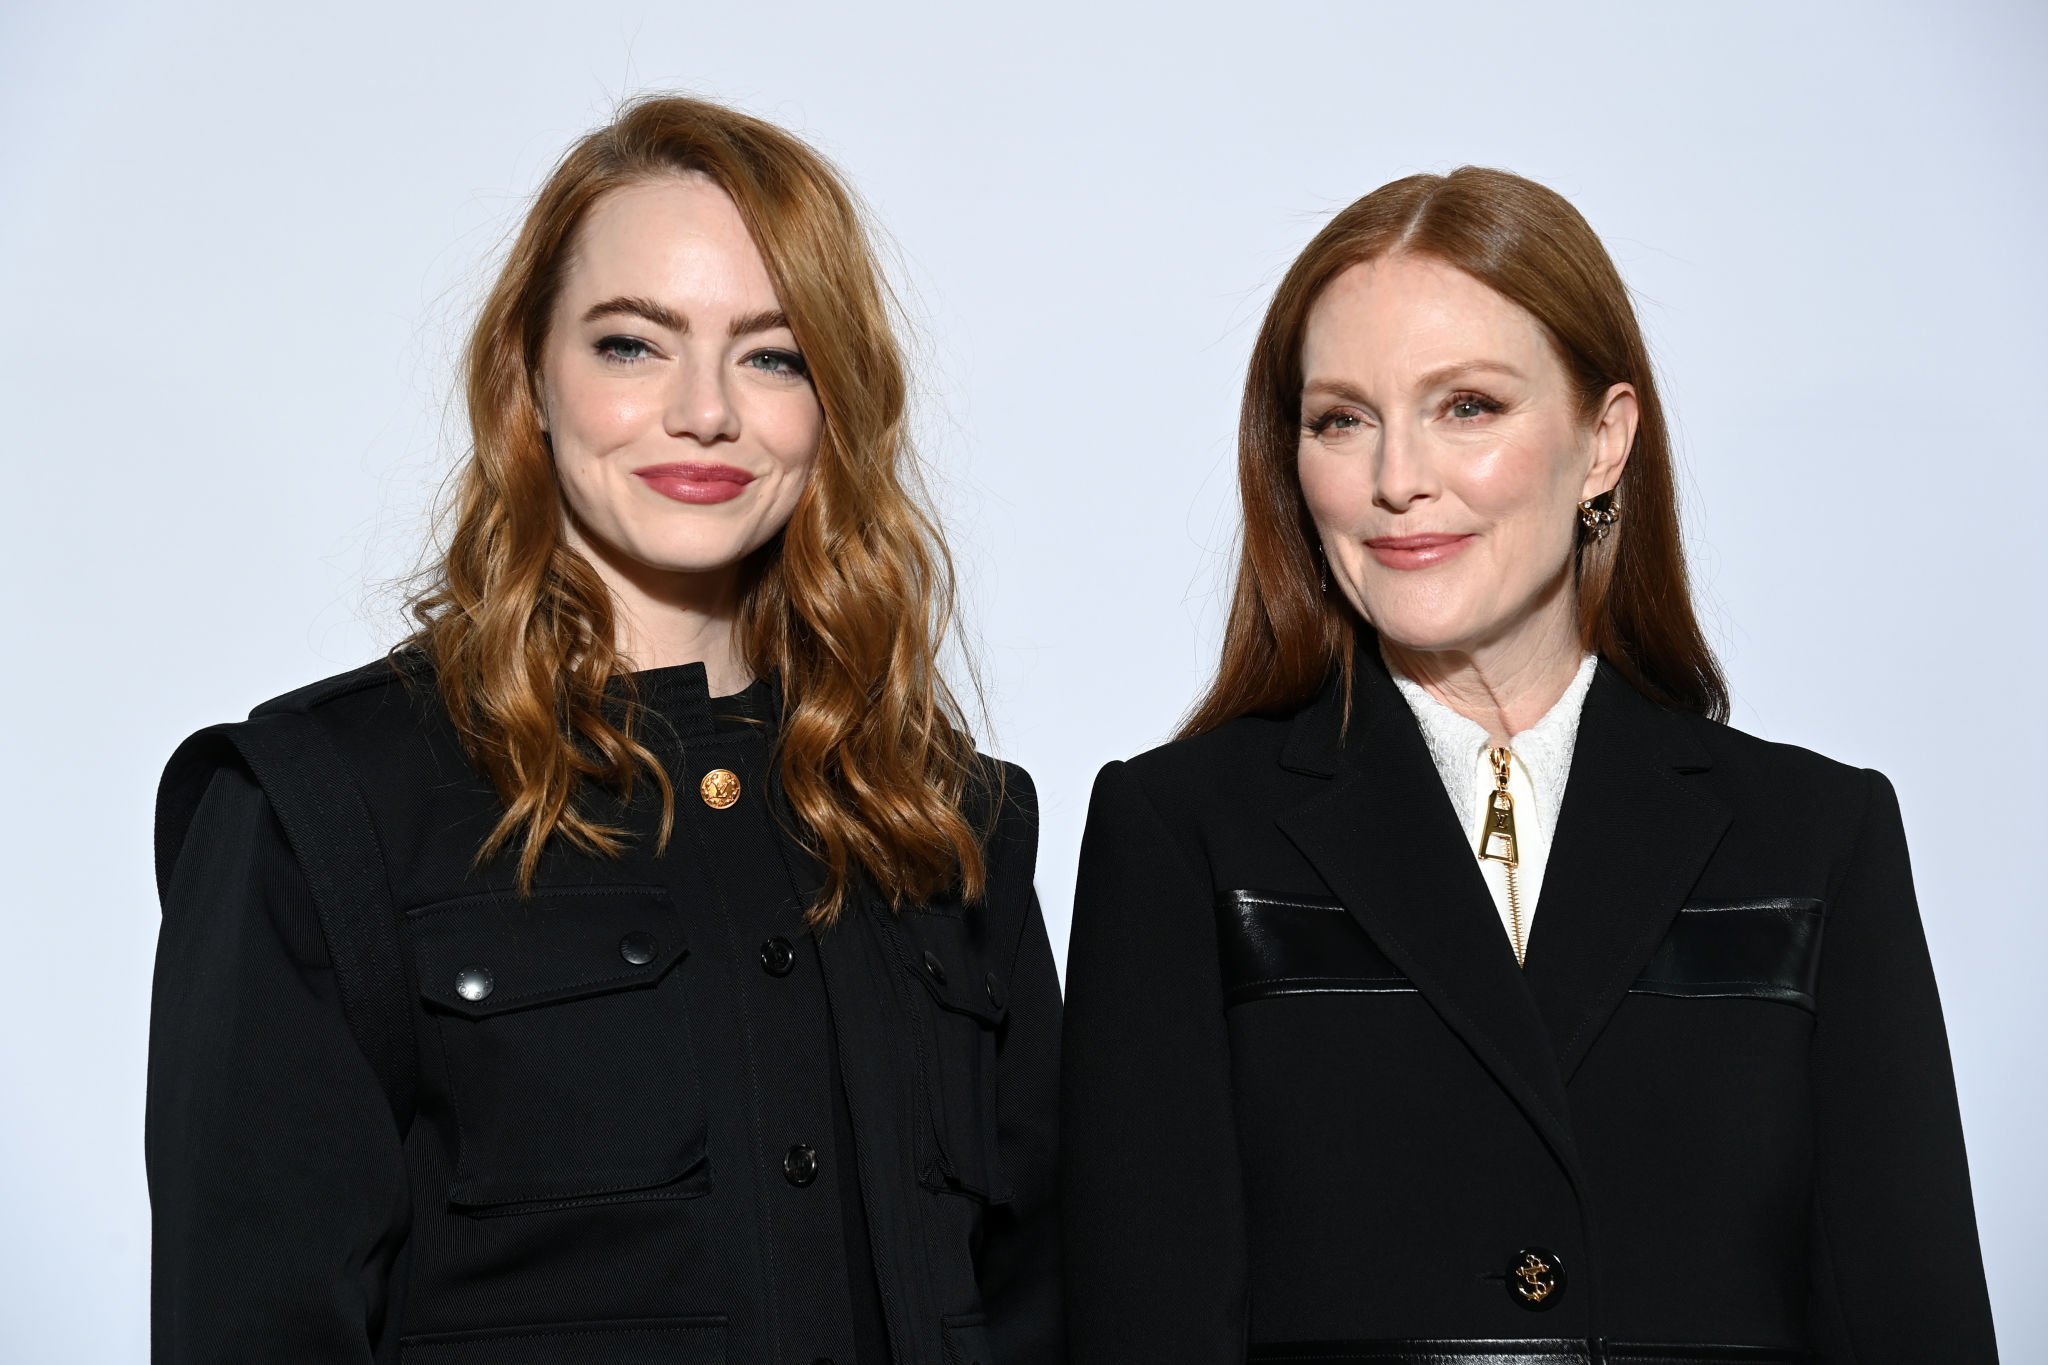 best of emma stone on X: Emma Stone and Julianne Moore at the